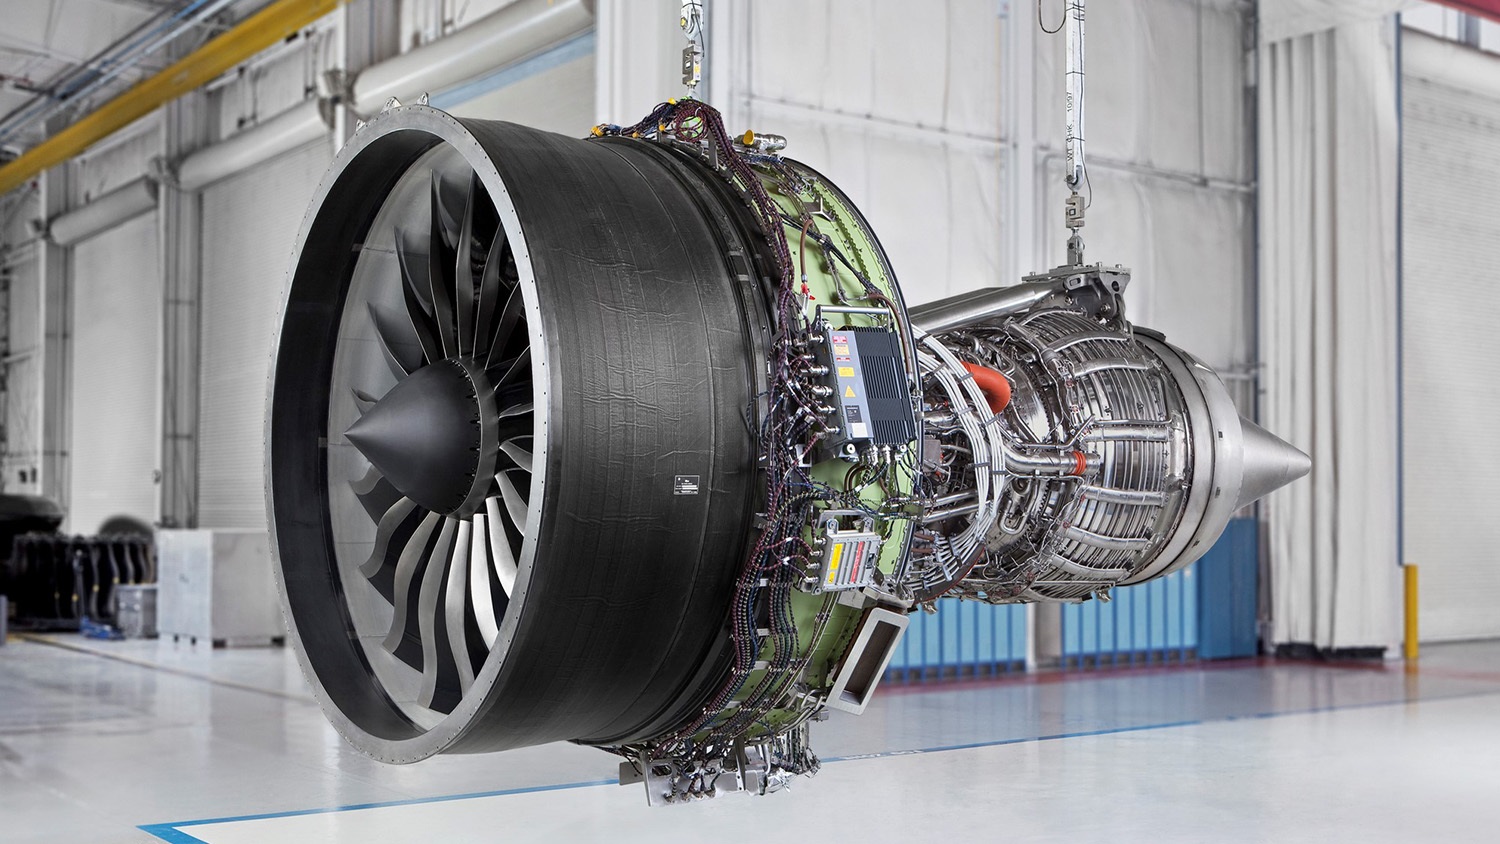 GKN Aerospace and GE Sign Agreement on Industry Leading Aero Engines